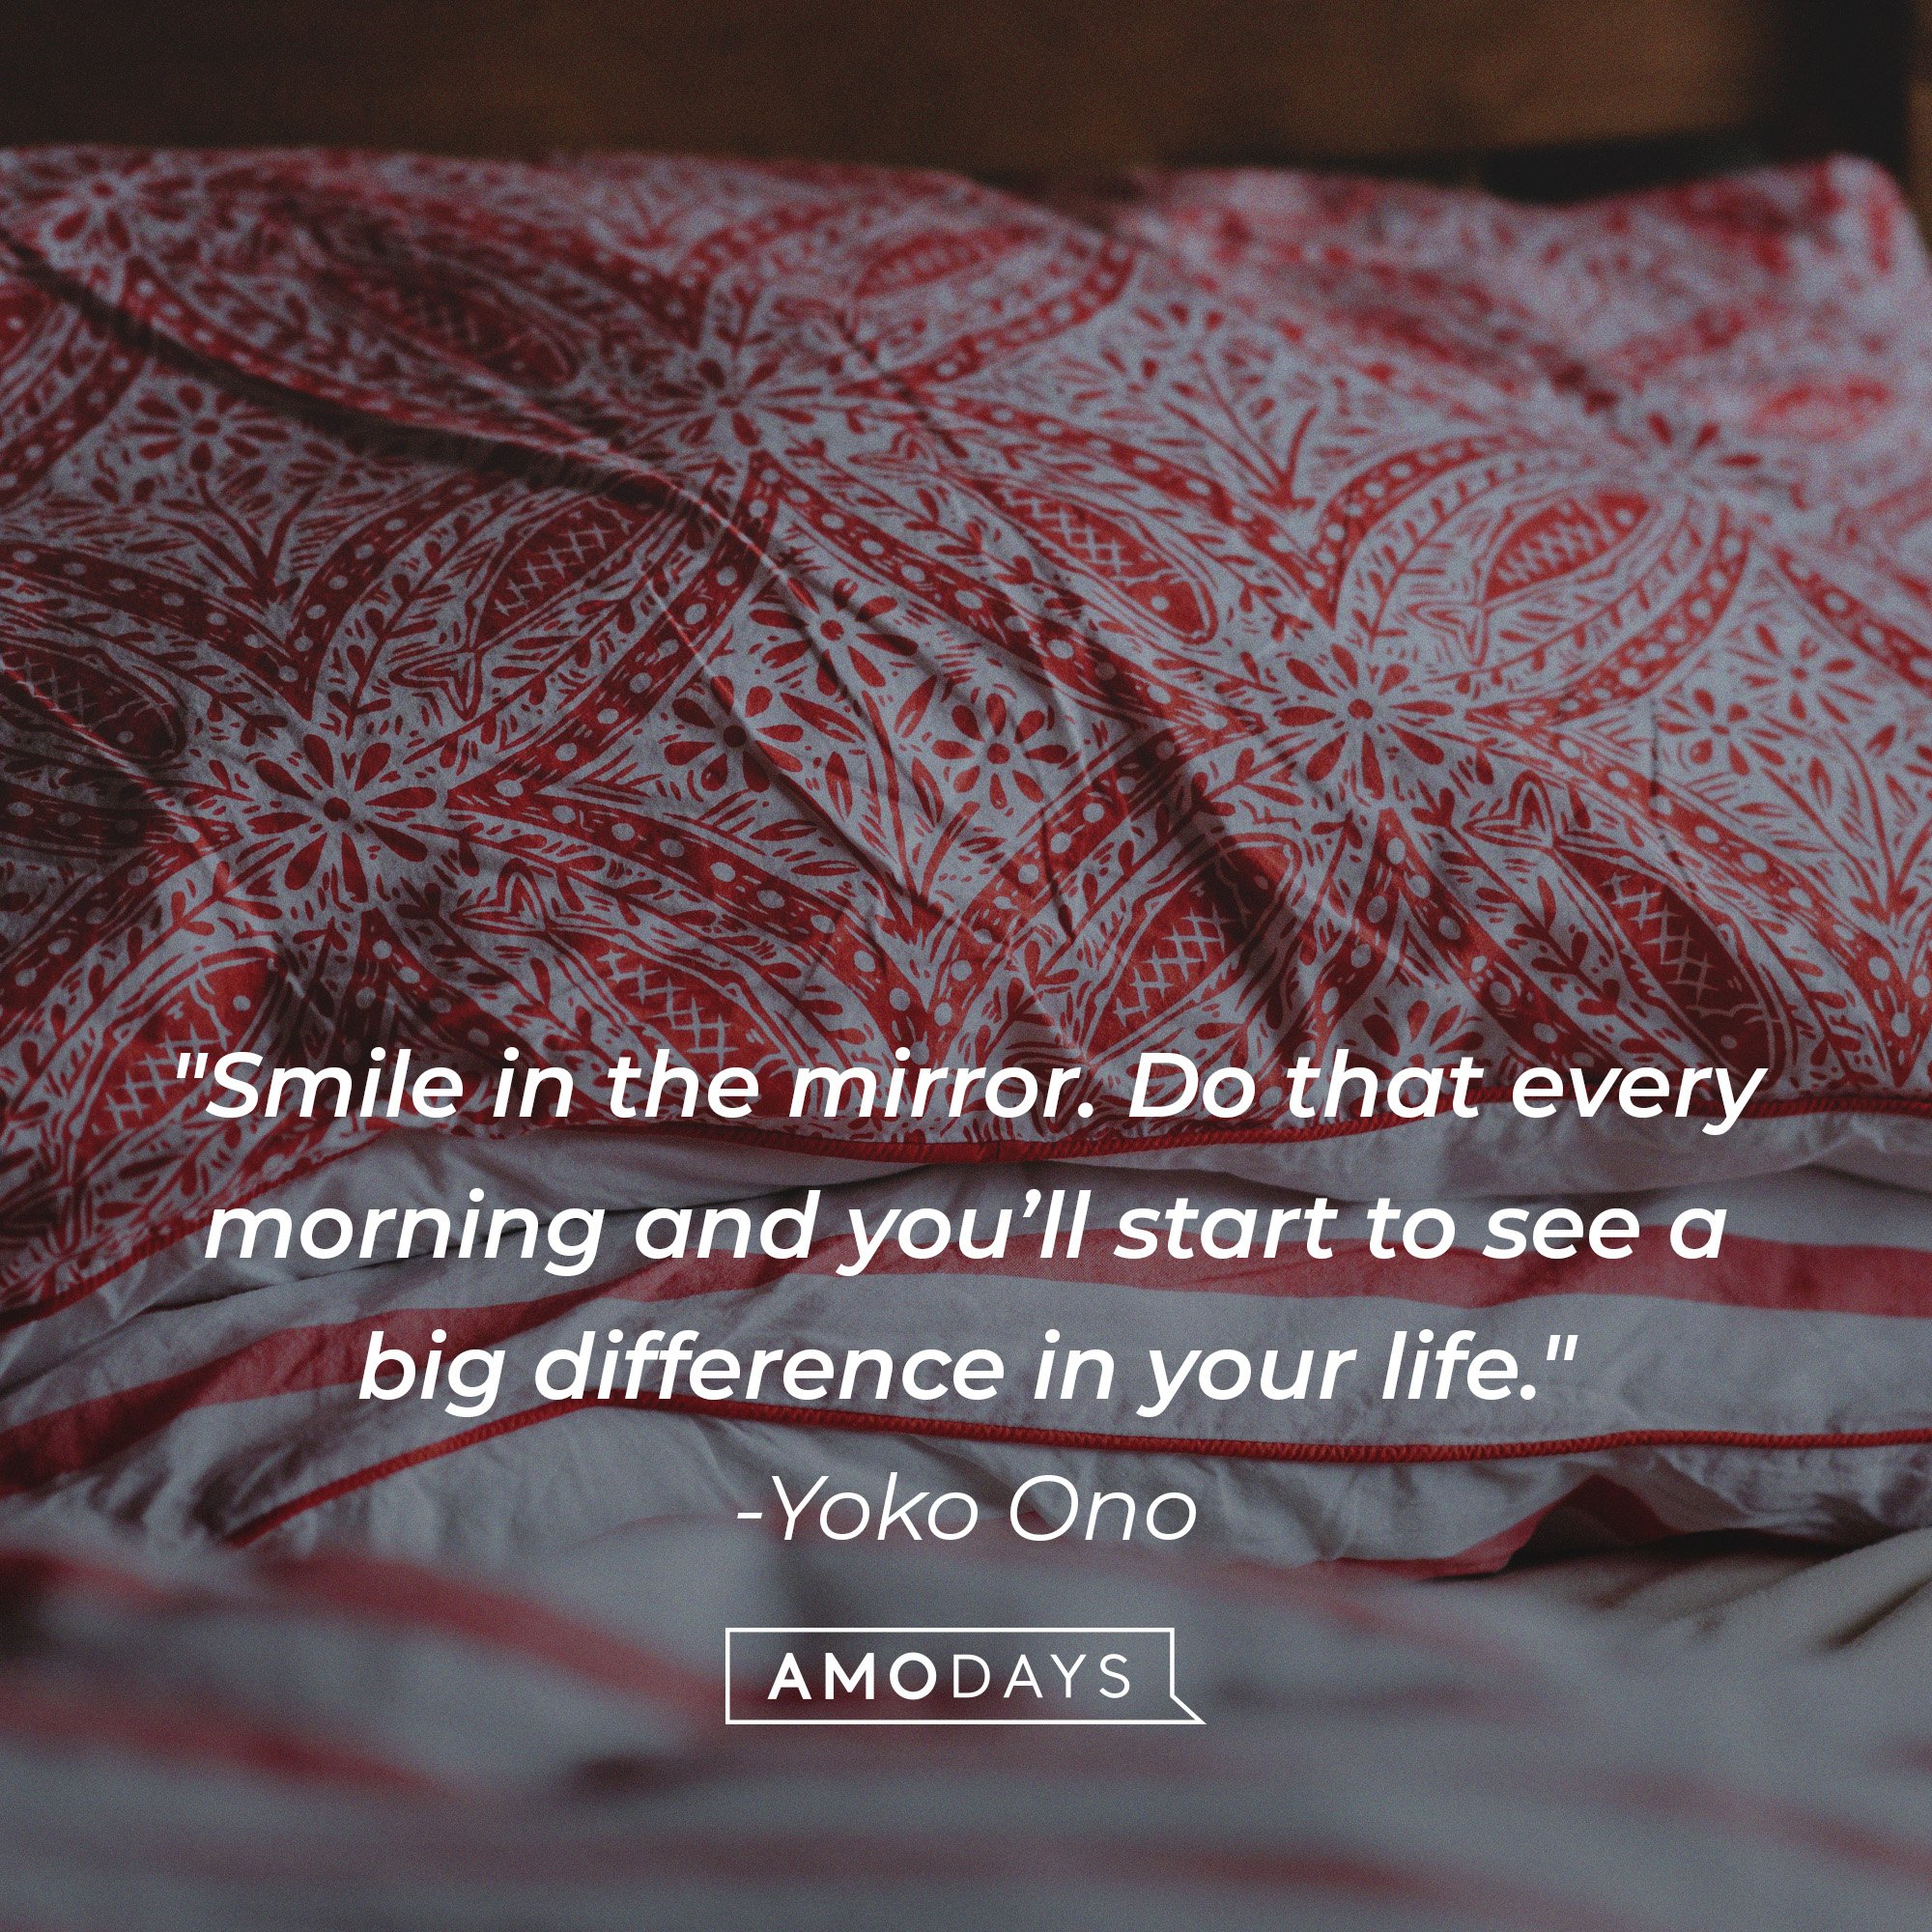 Yoko Ono's quote: " Today, give a stranger one of your smiles. It might be the only sunshine he sees all day." | Image: AmoDays 